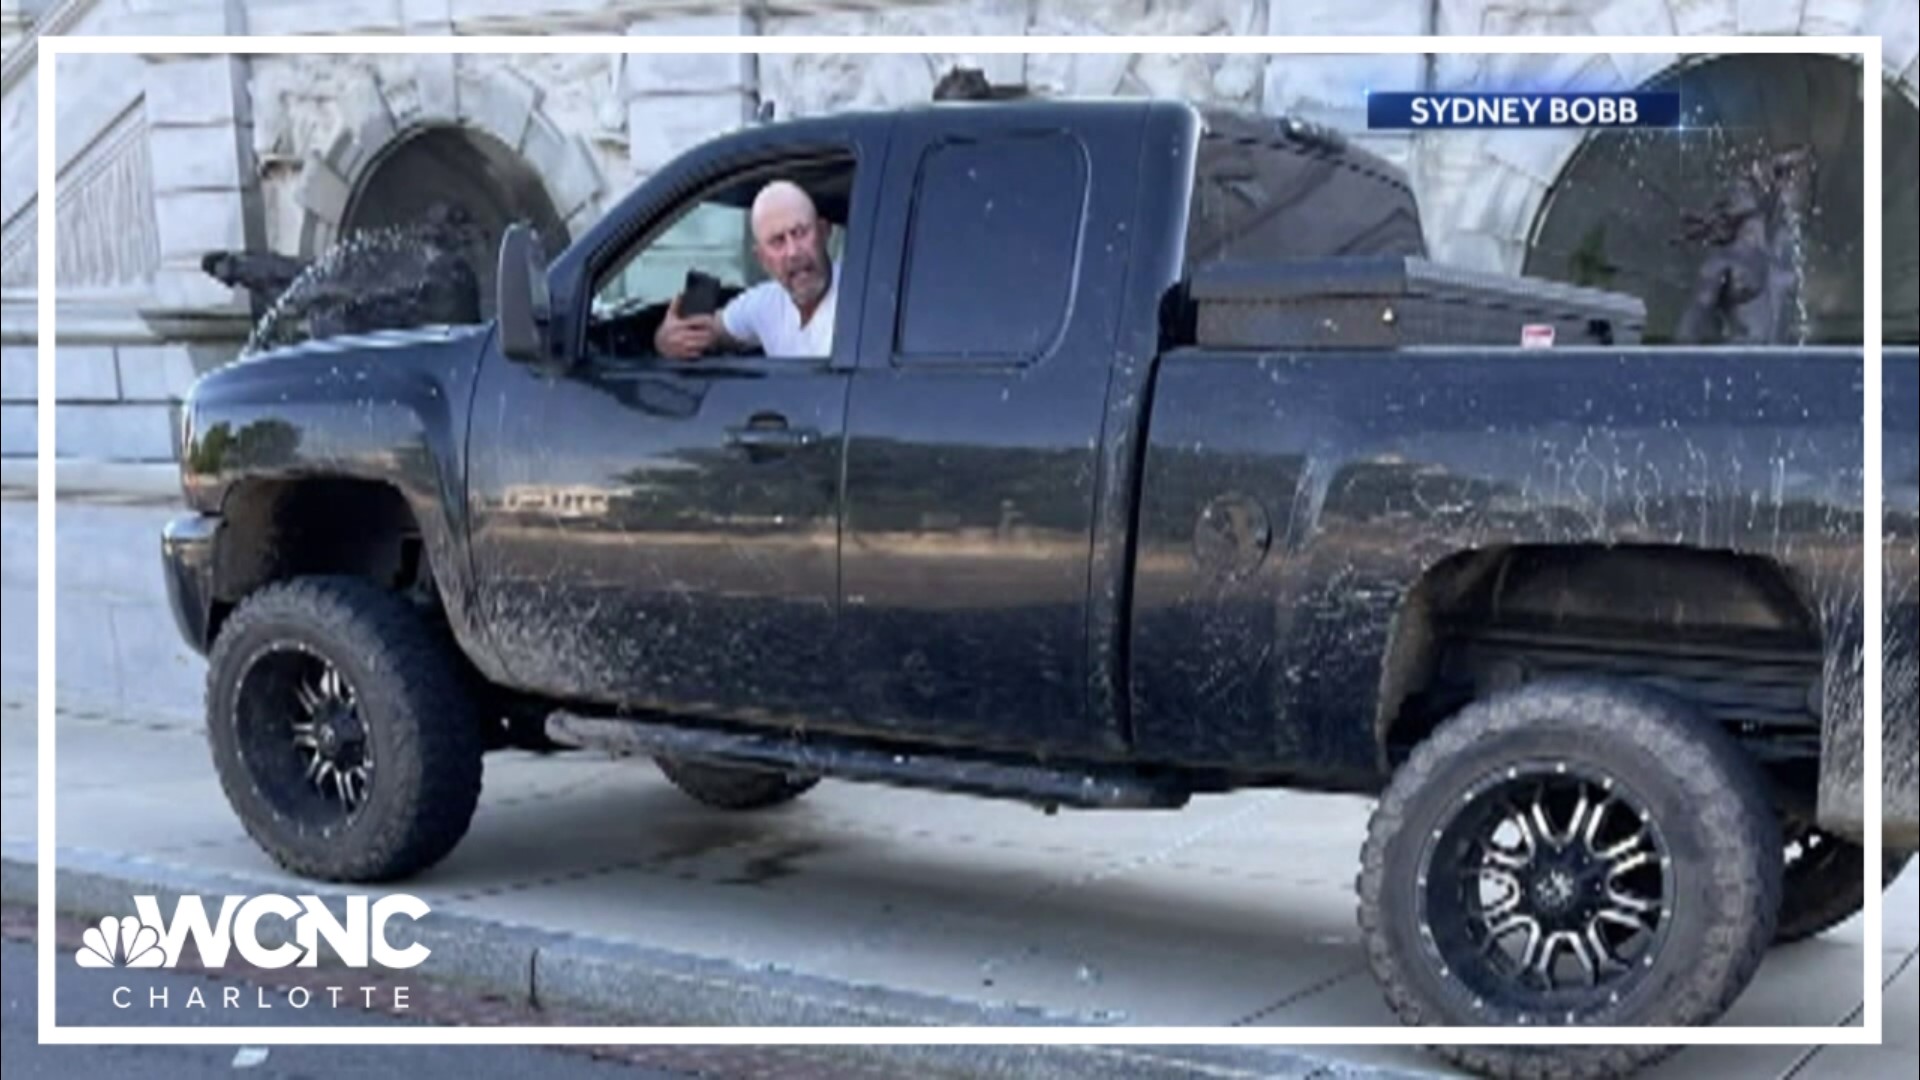 A man who threatened to blow up his truck outside of the Library of Congress in August 2021 will serve five years probation.